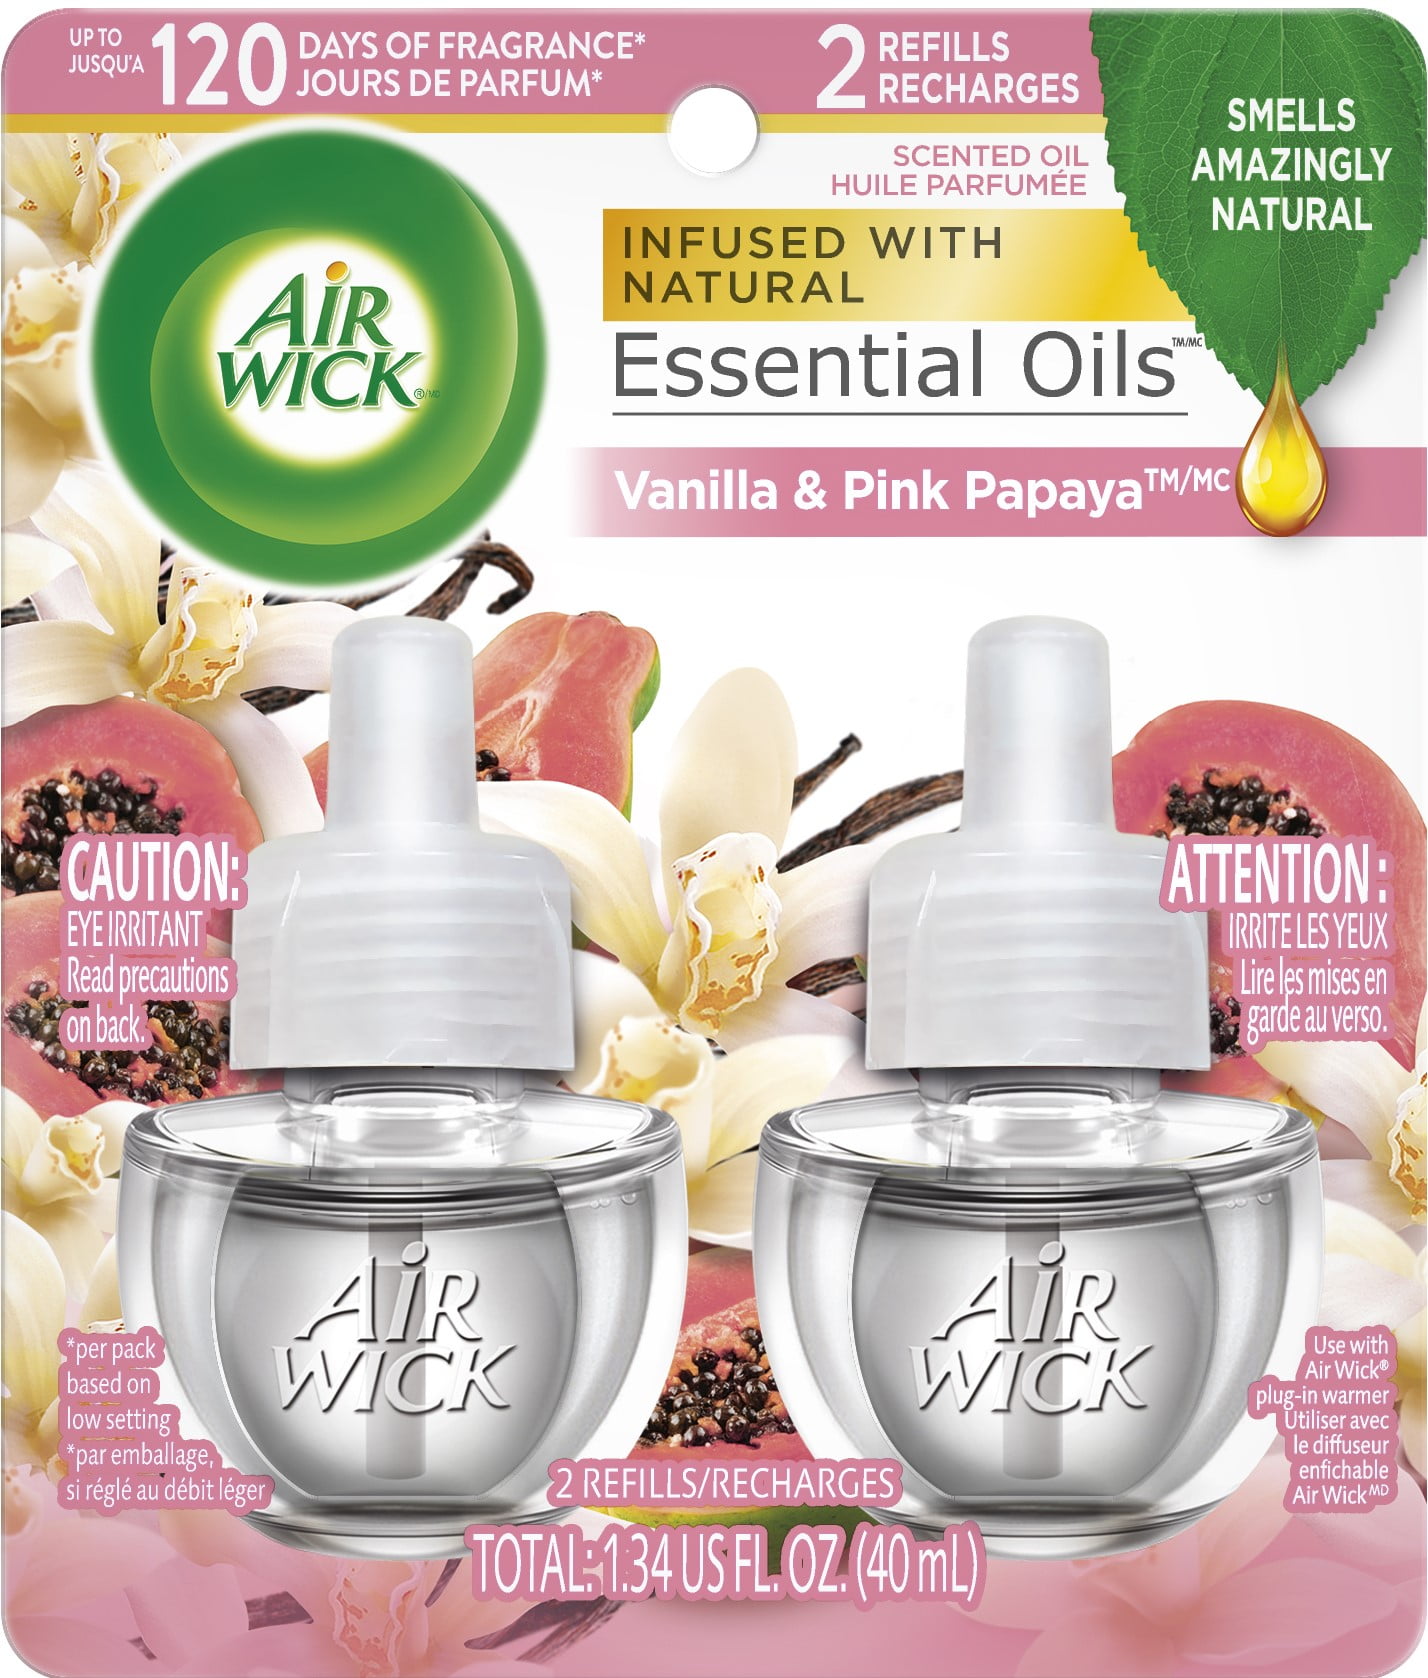 Air Wick Plug in Scented Oil Refill, 2 ct, Vanilla and Pink Papaya, Air Freshener, Essential Oils